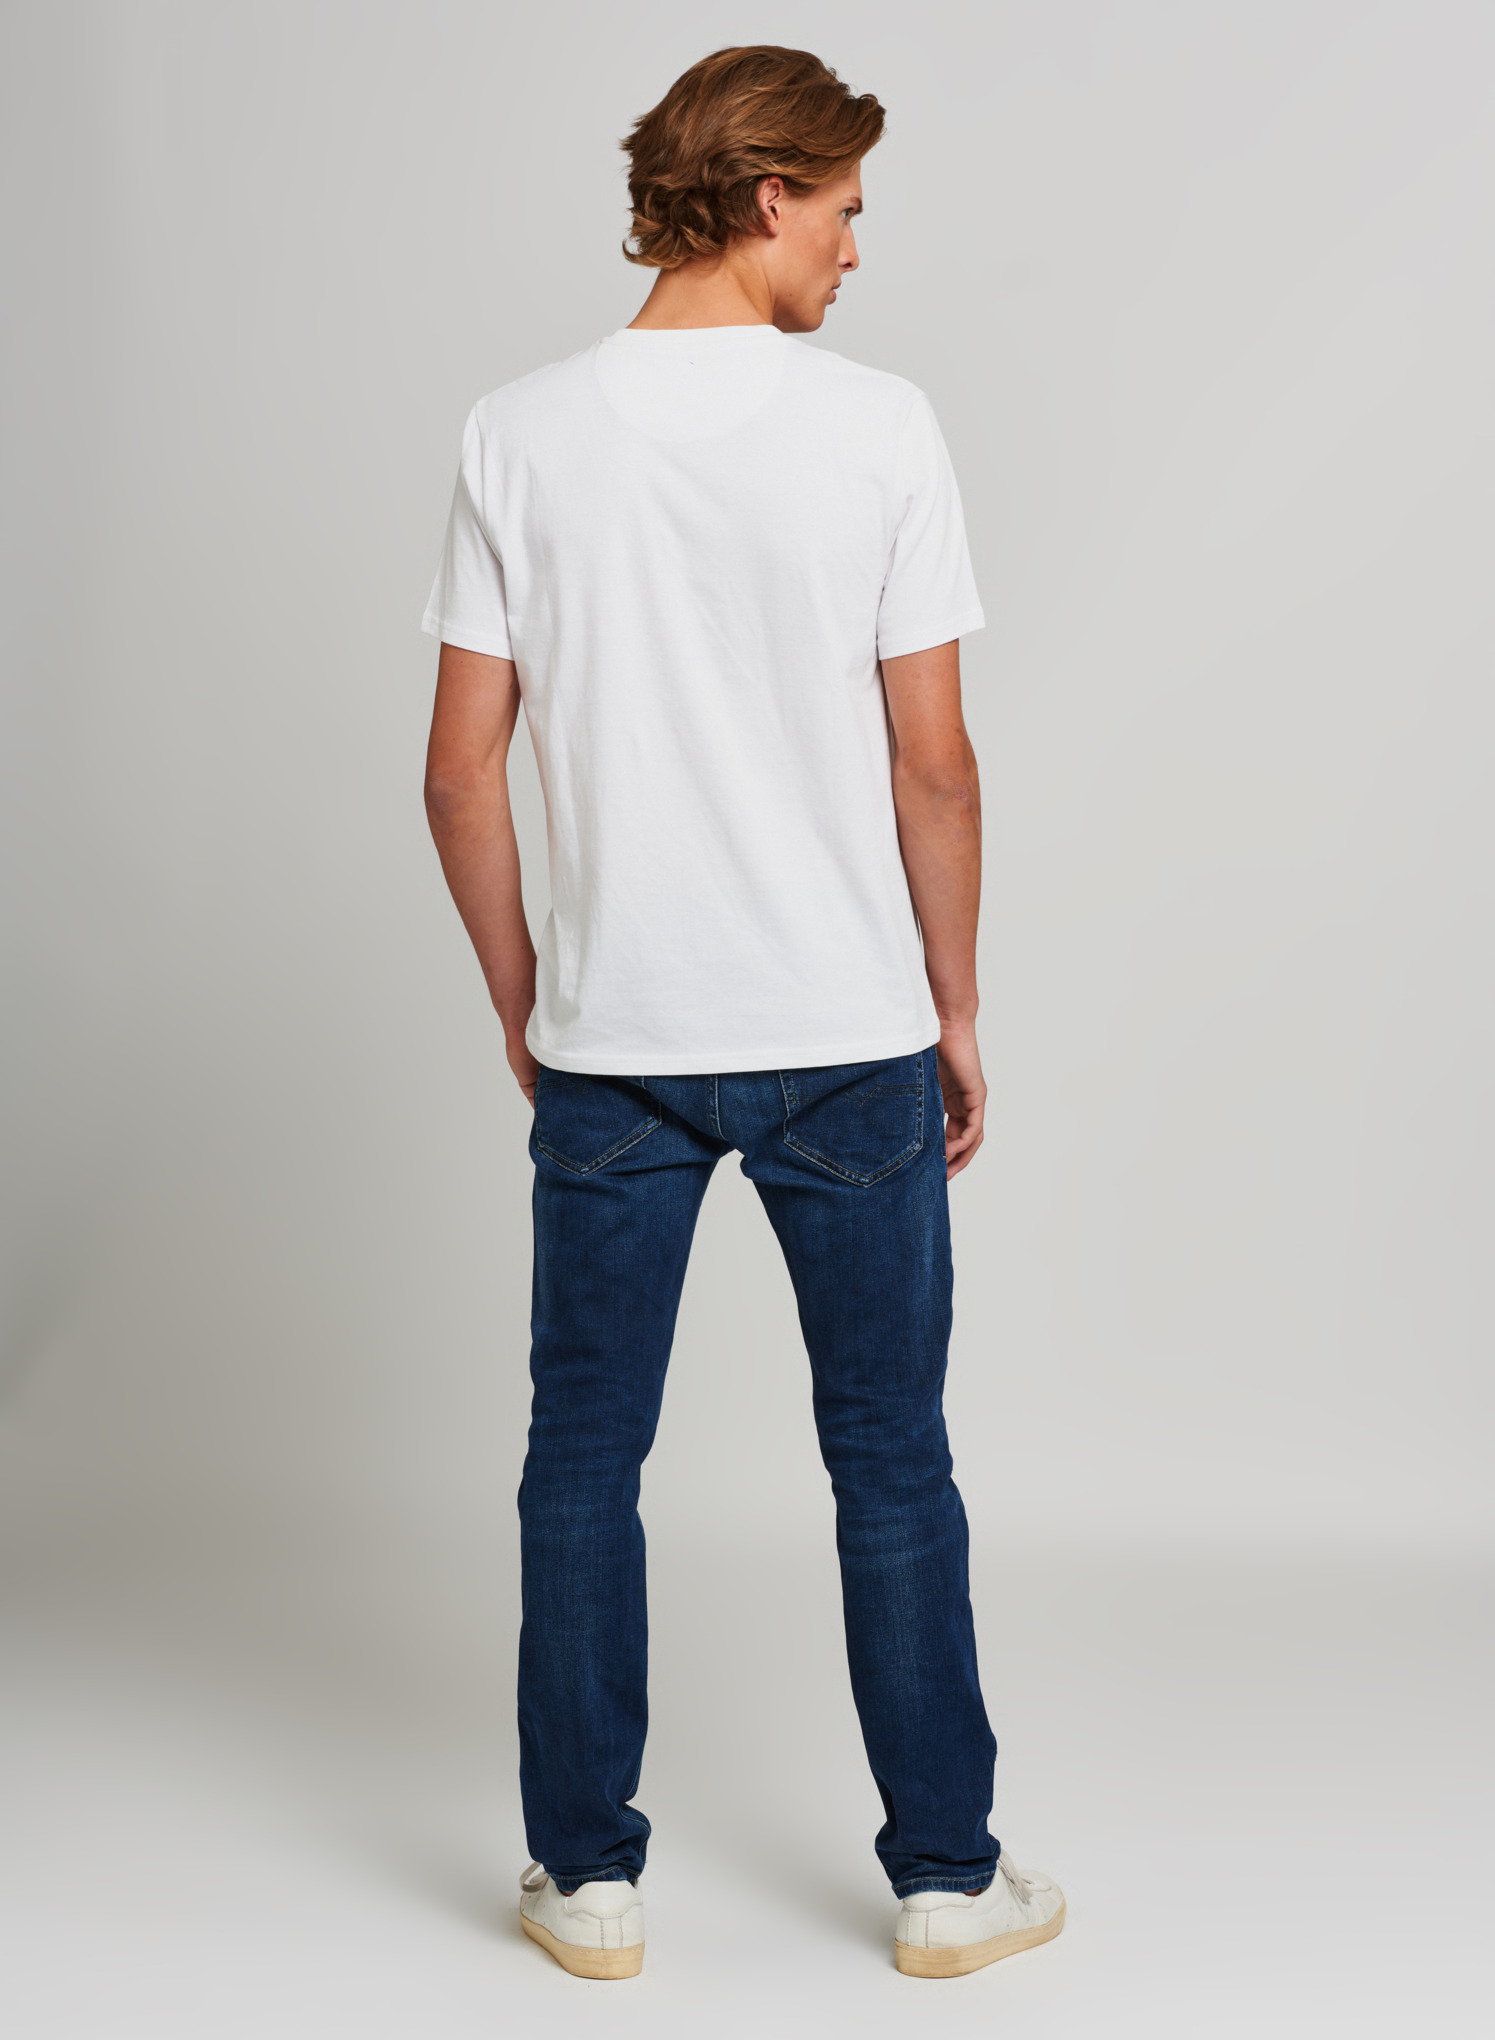 T-shirt "SMALL AXE" blanc Homme